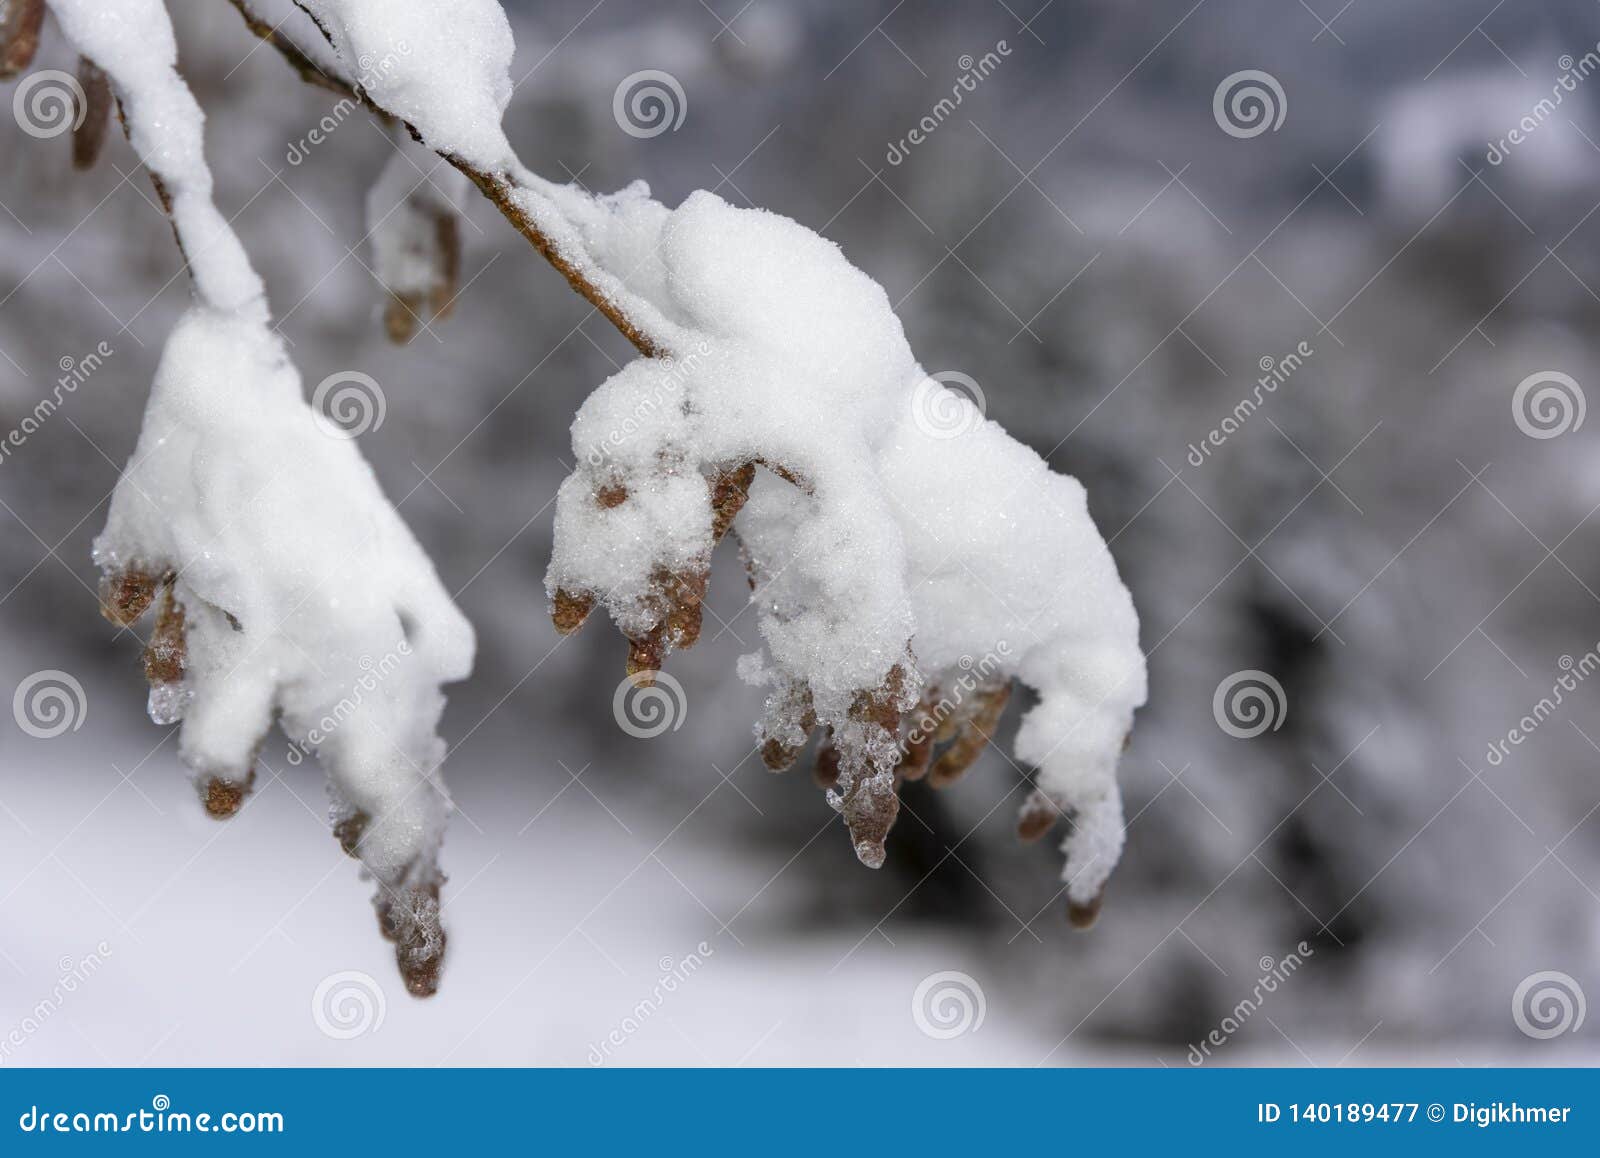 Hanging Snow on the Branches Stock Image - Image of light, glitter ...